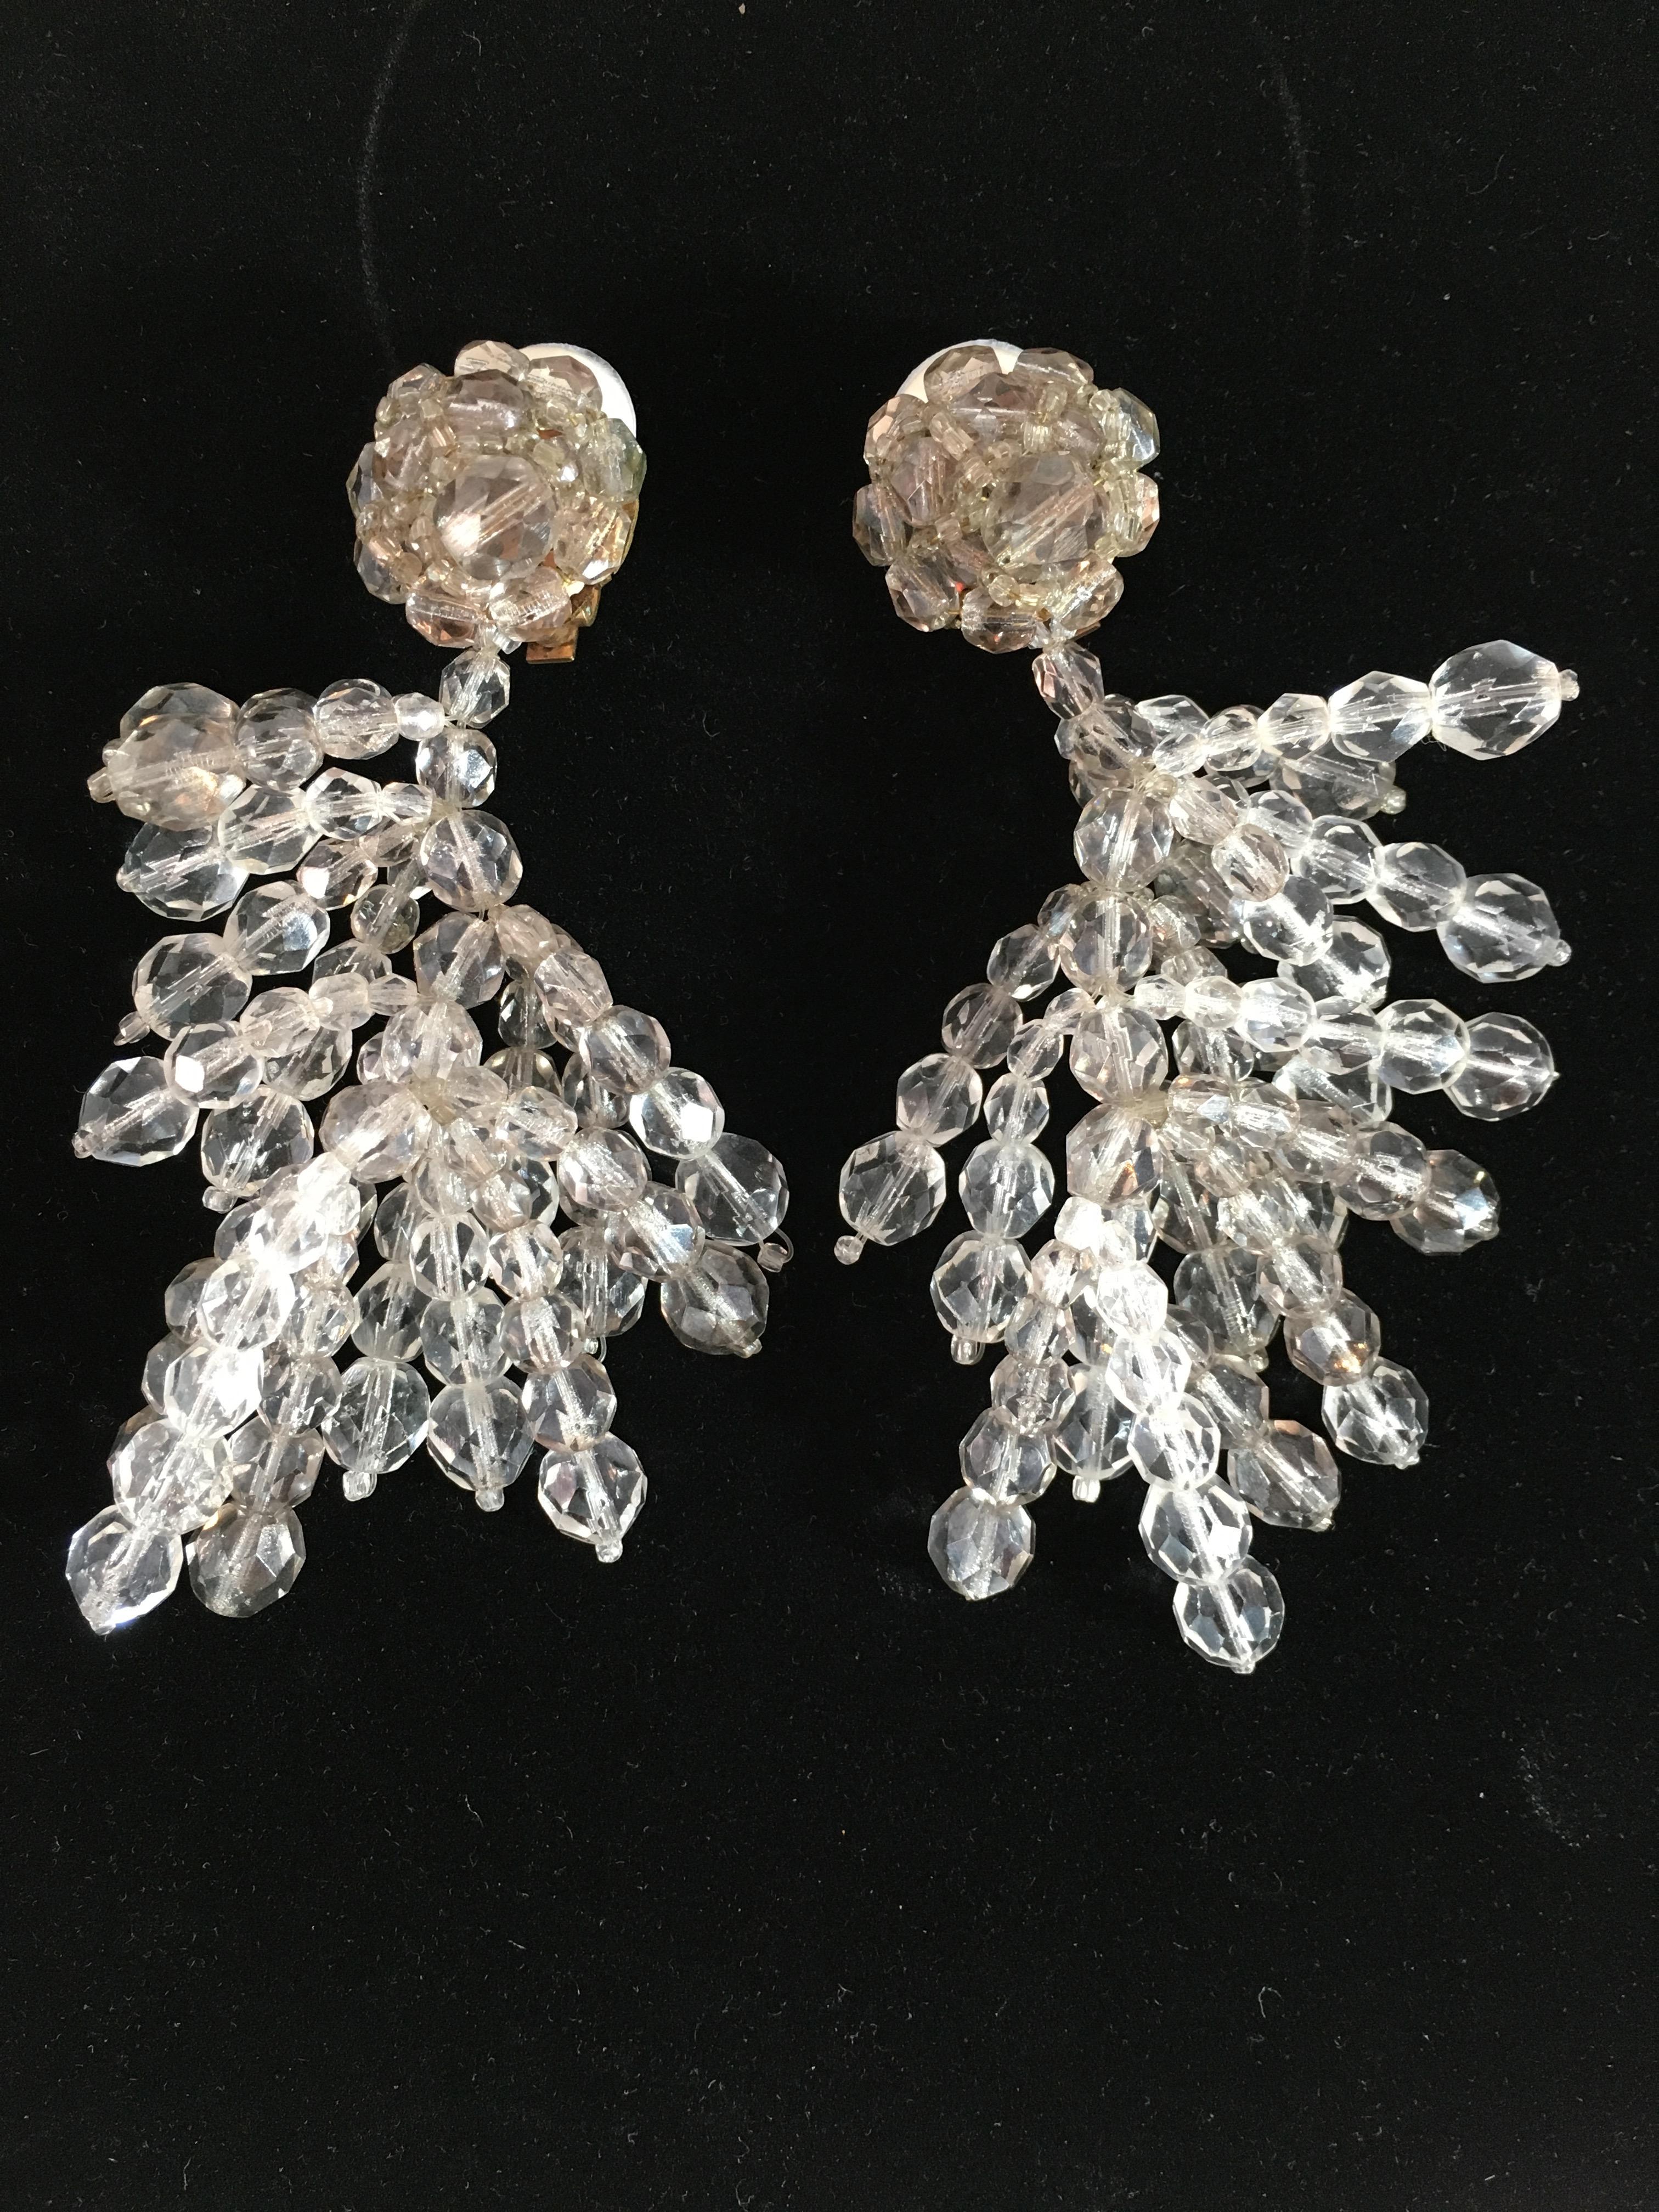 This is a stunning pair of 1950s Coppola e Toppo clip-on earrings. They are made out of grey and clear faceted glass beads and have a classic Coppola e Toppo ombre effect. They measure 4